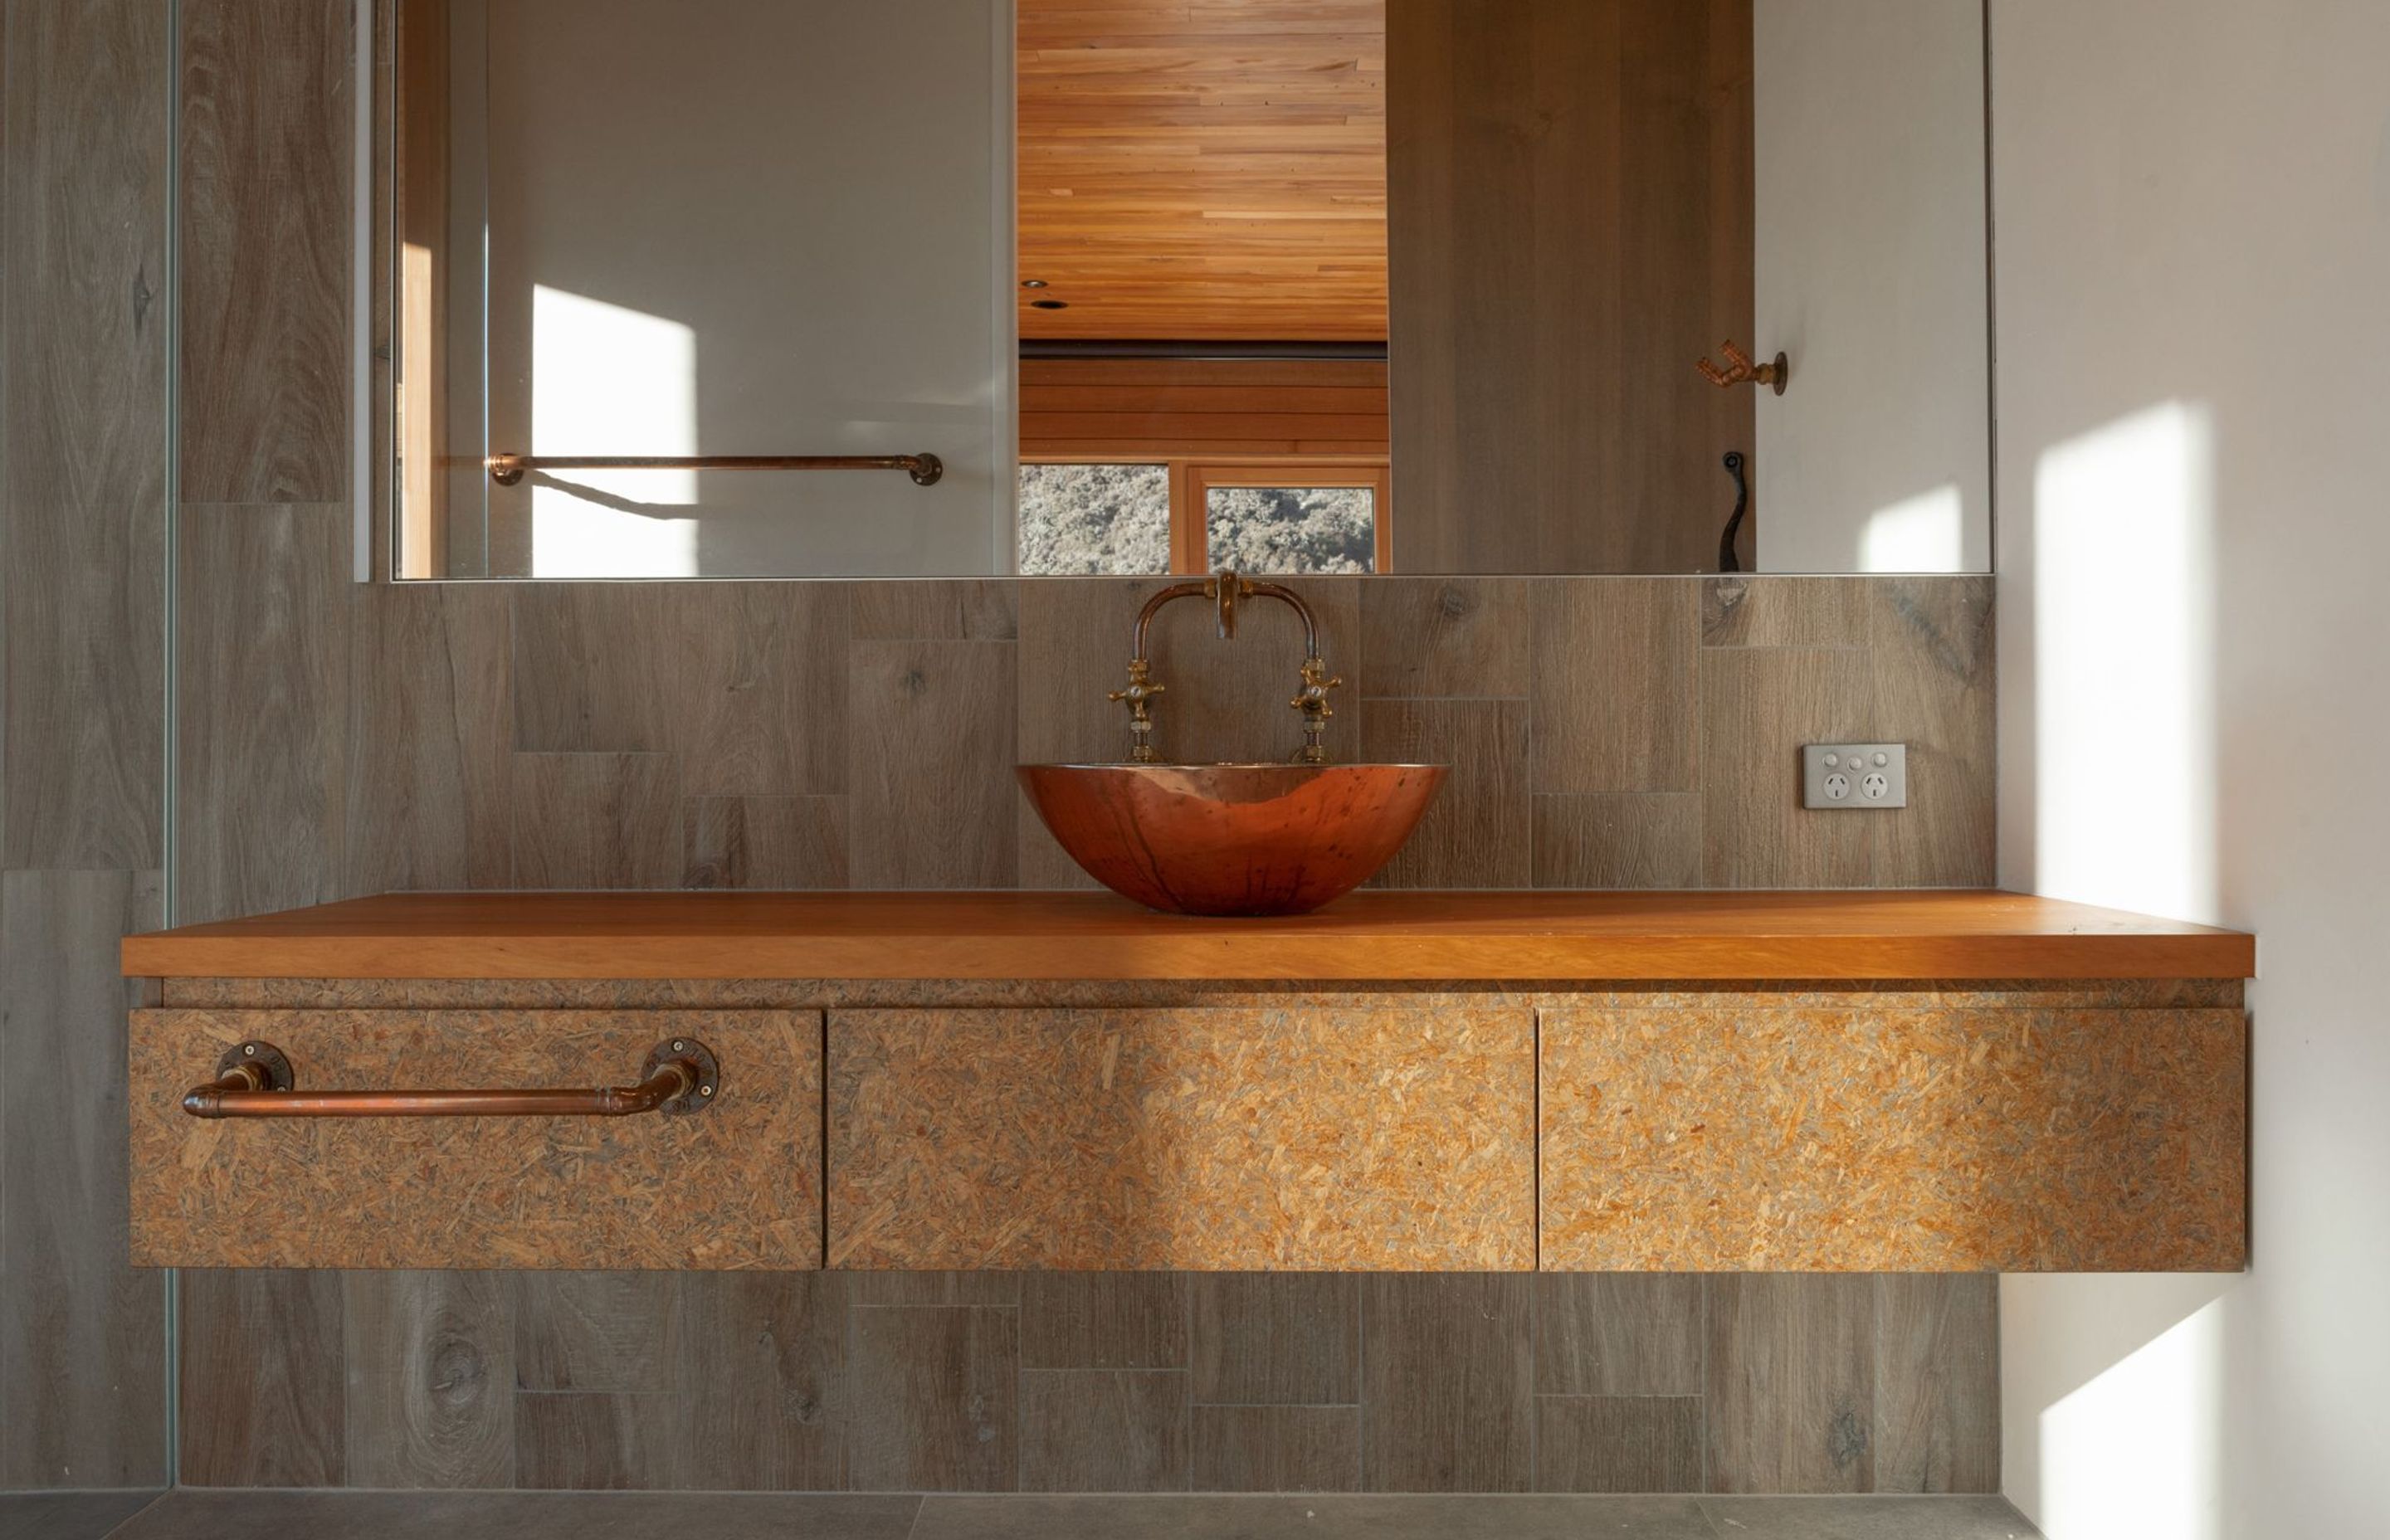 The ensuite features a custom strand board vanity and a handmade copper vessel basin.